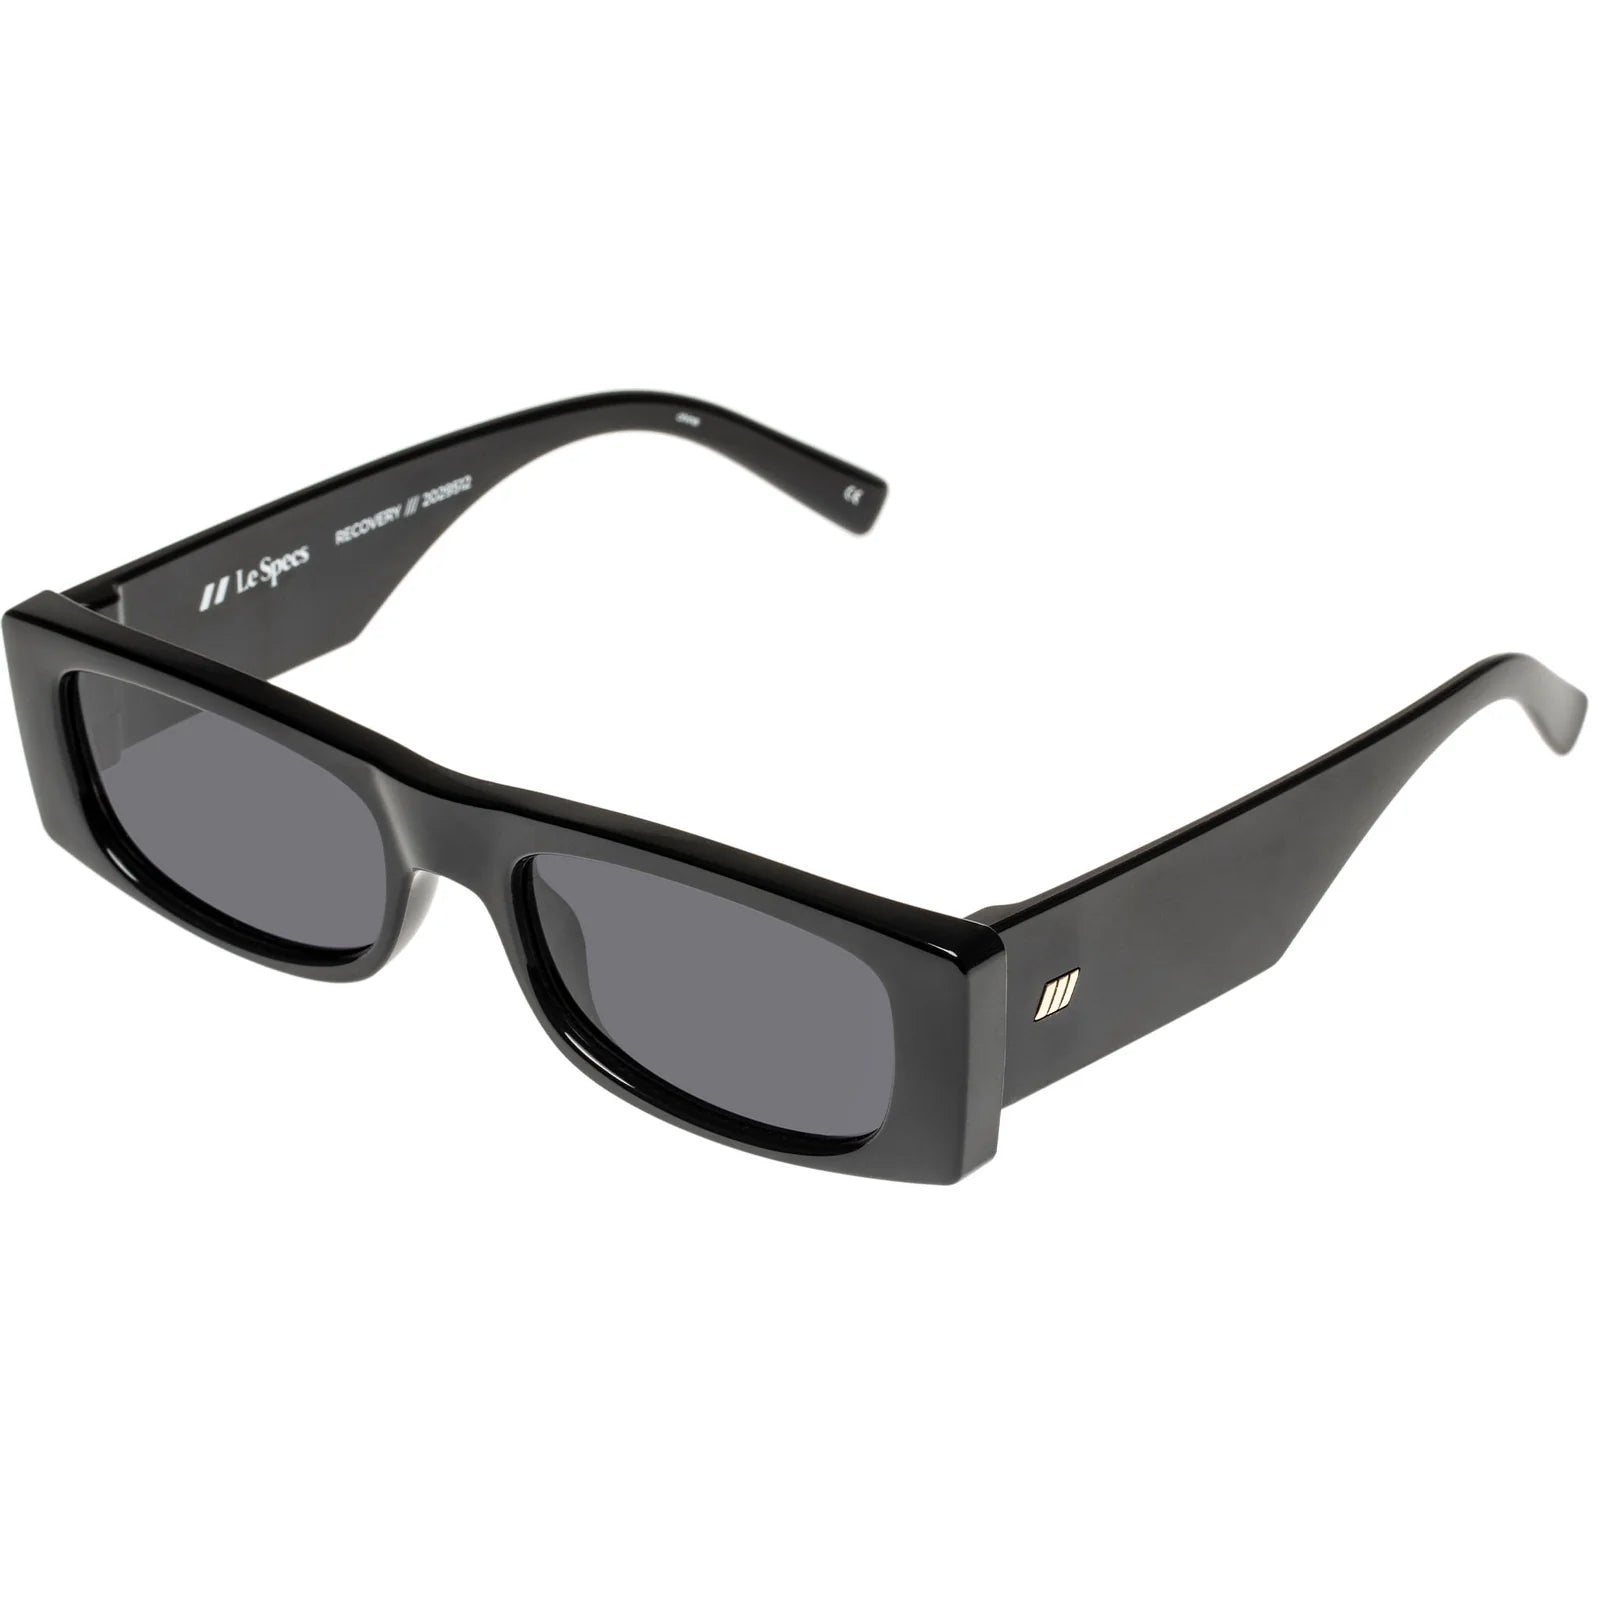 Le Sustain Sunglasses - Recovery